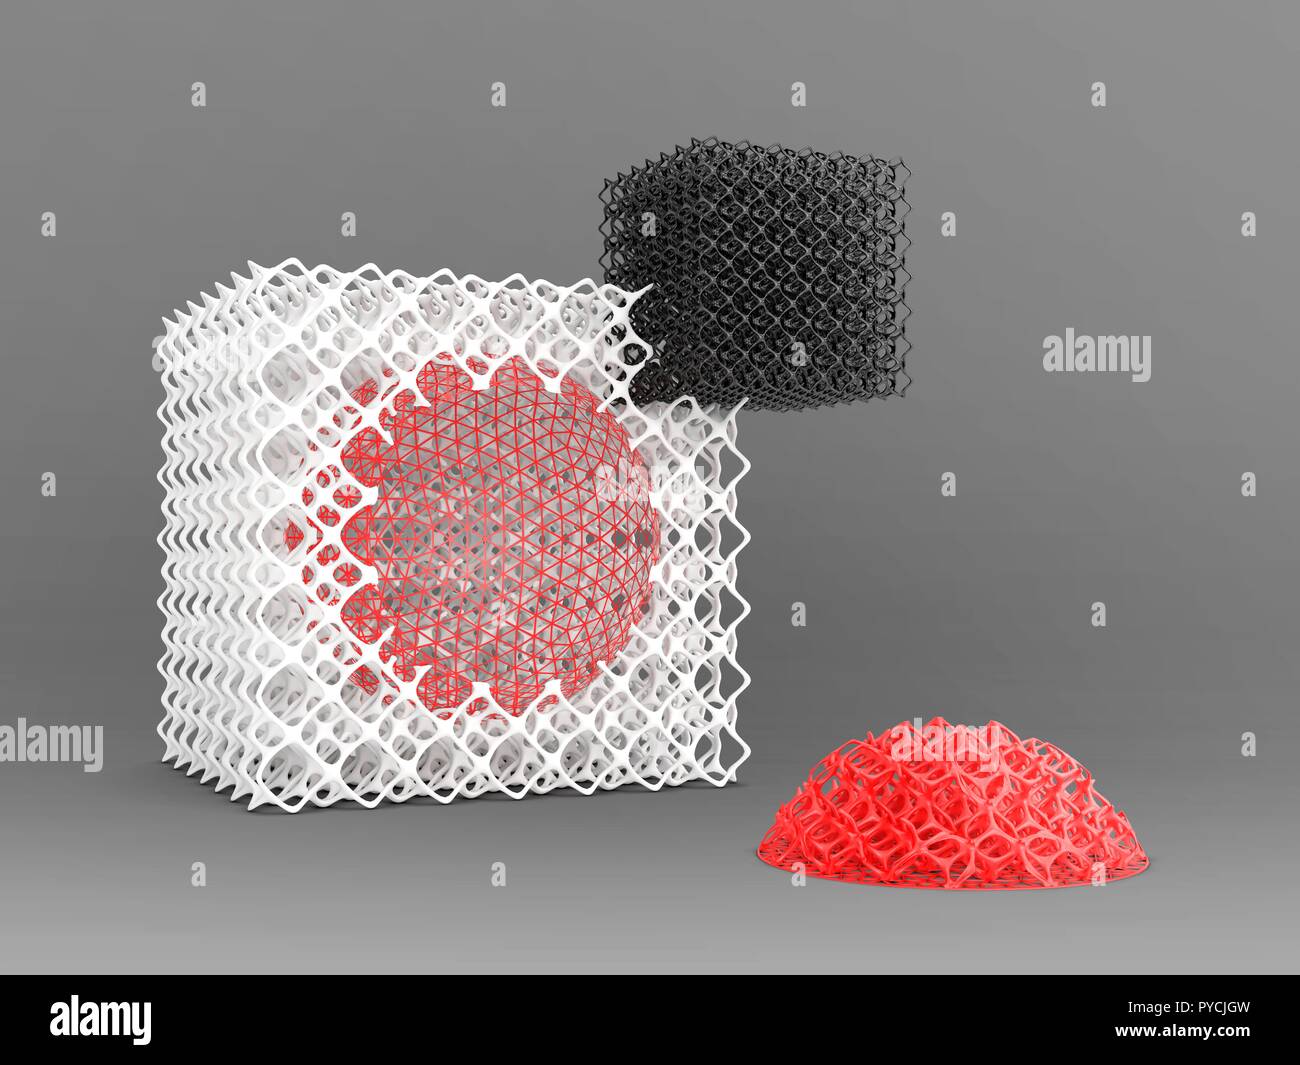 Geometric objects made by 3D printer, illustration. Stock Photo